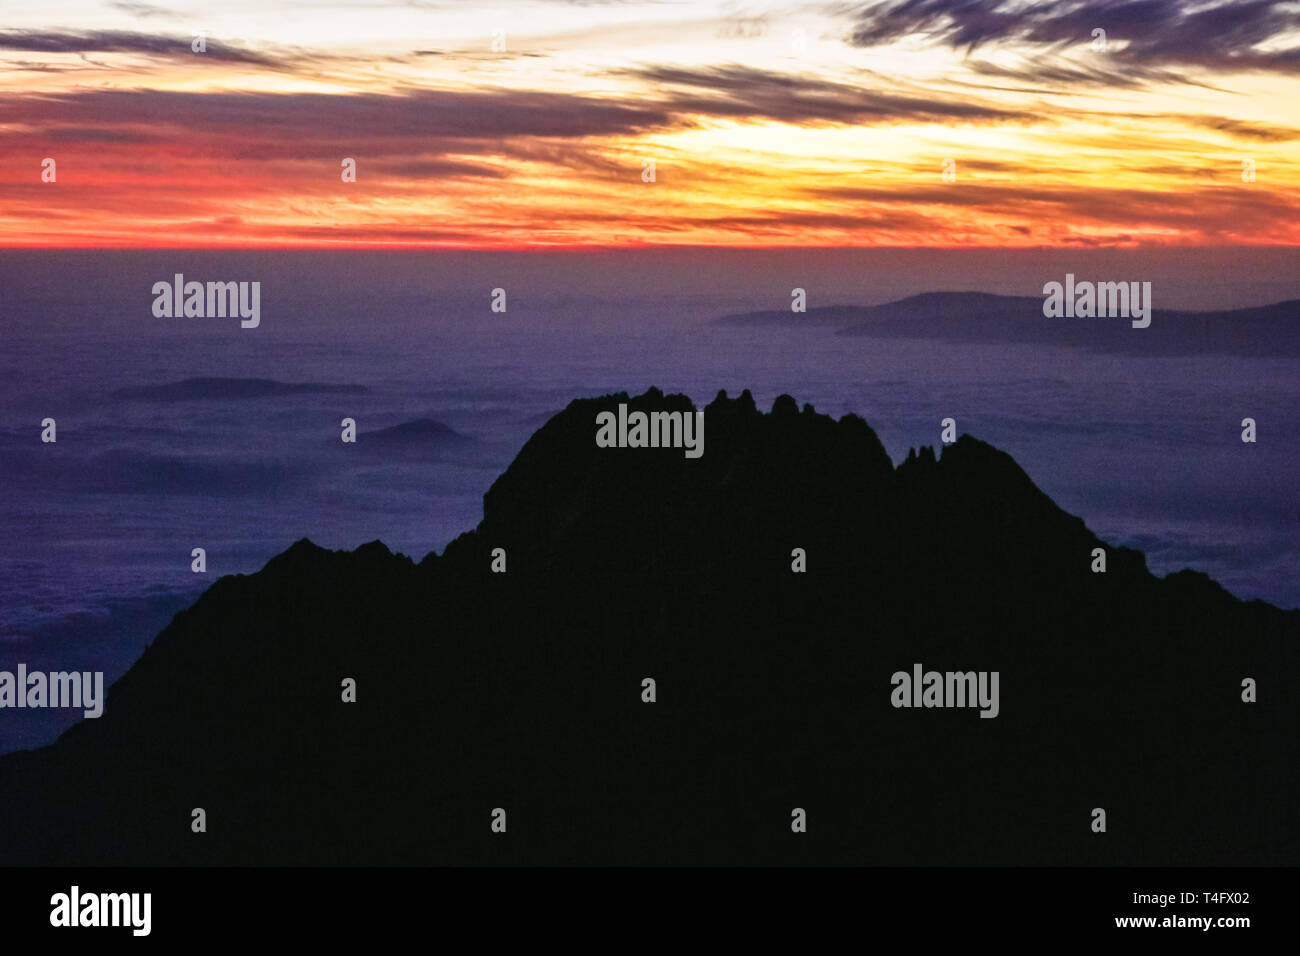 Scenic view on the Kilimanjaro mountains in Africa. Black high peaks on the warm pink background of the sunrise. Freedom and wild nature, great place Stock Photo